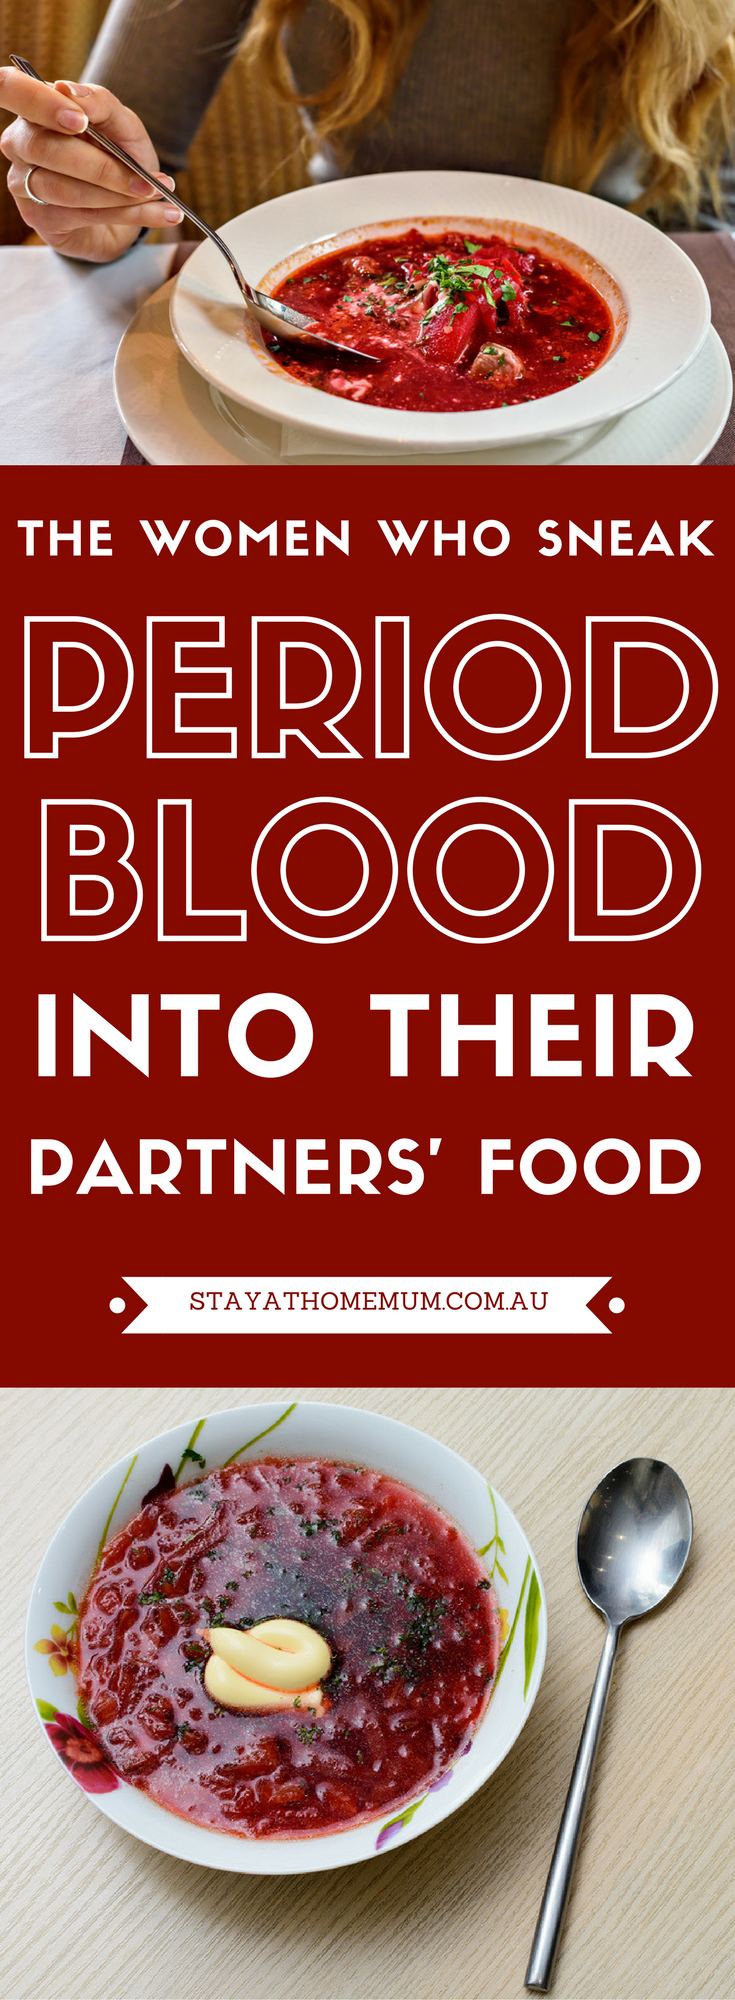 The Women Who Sneak Period Blood Into Their Partners' Food